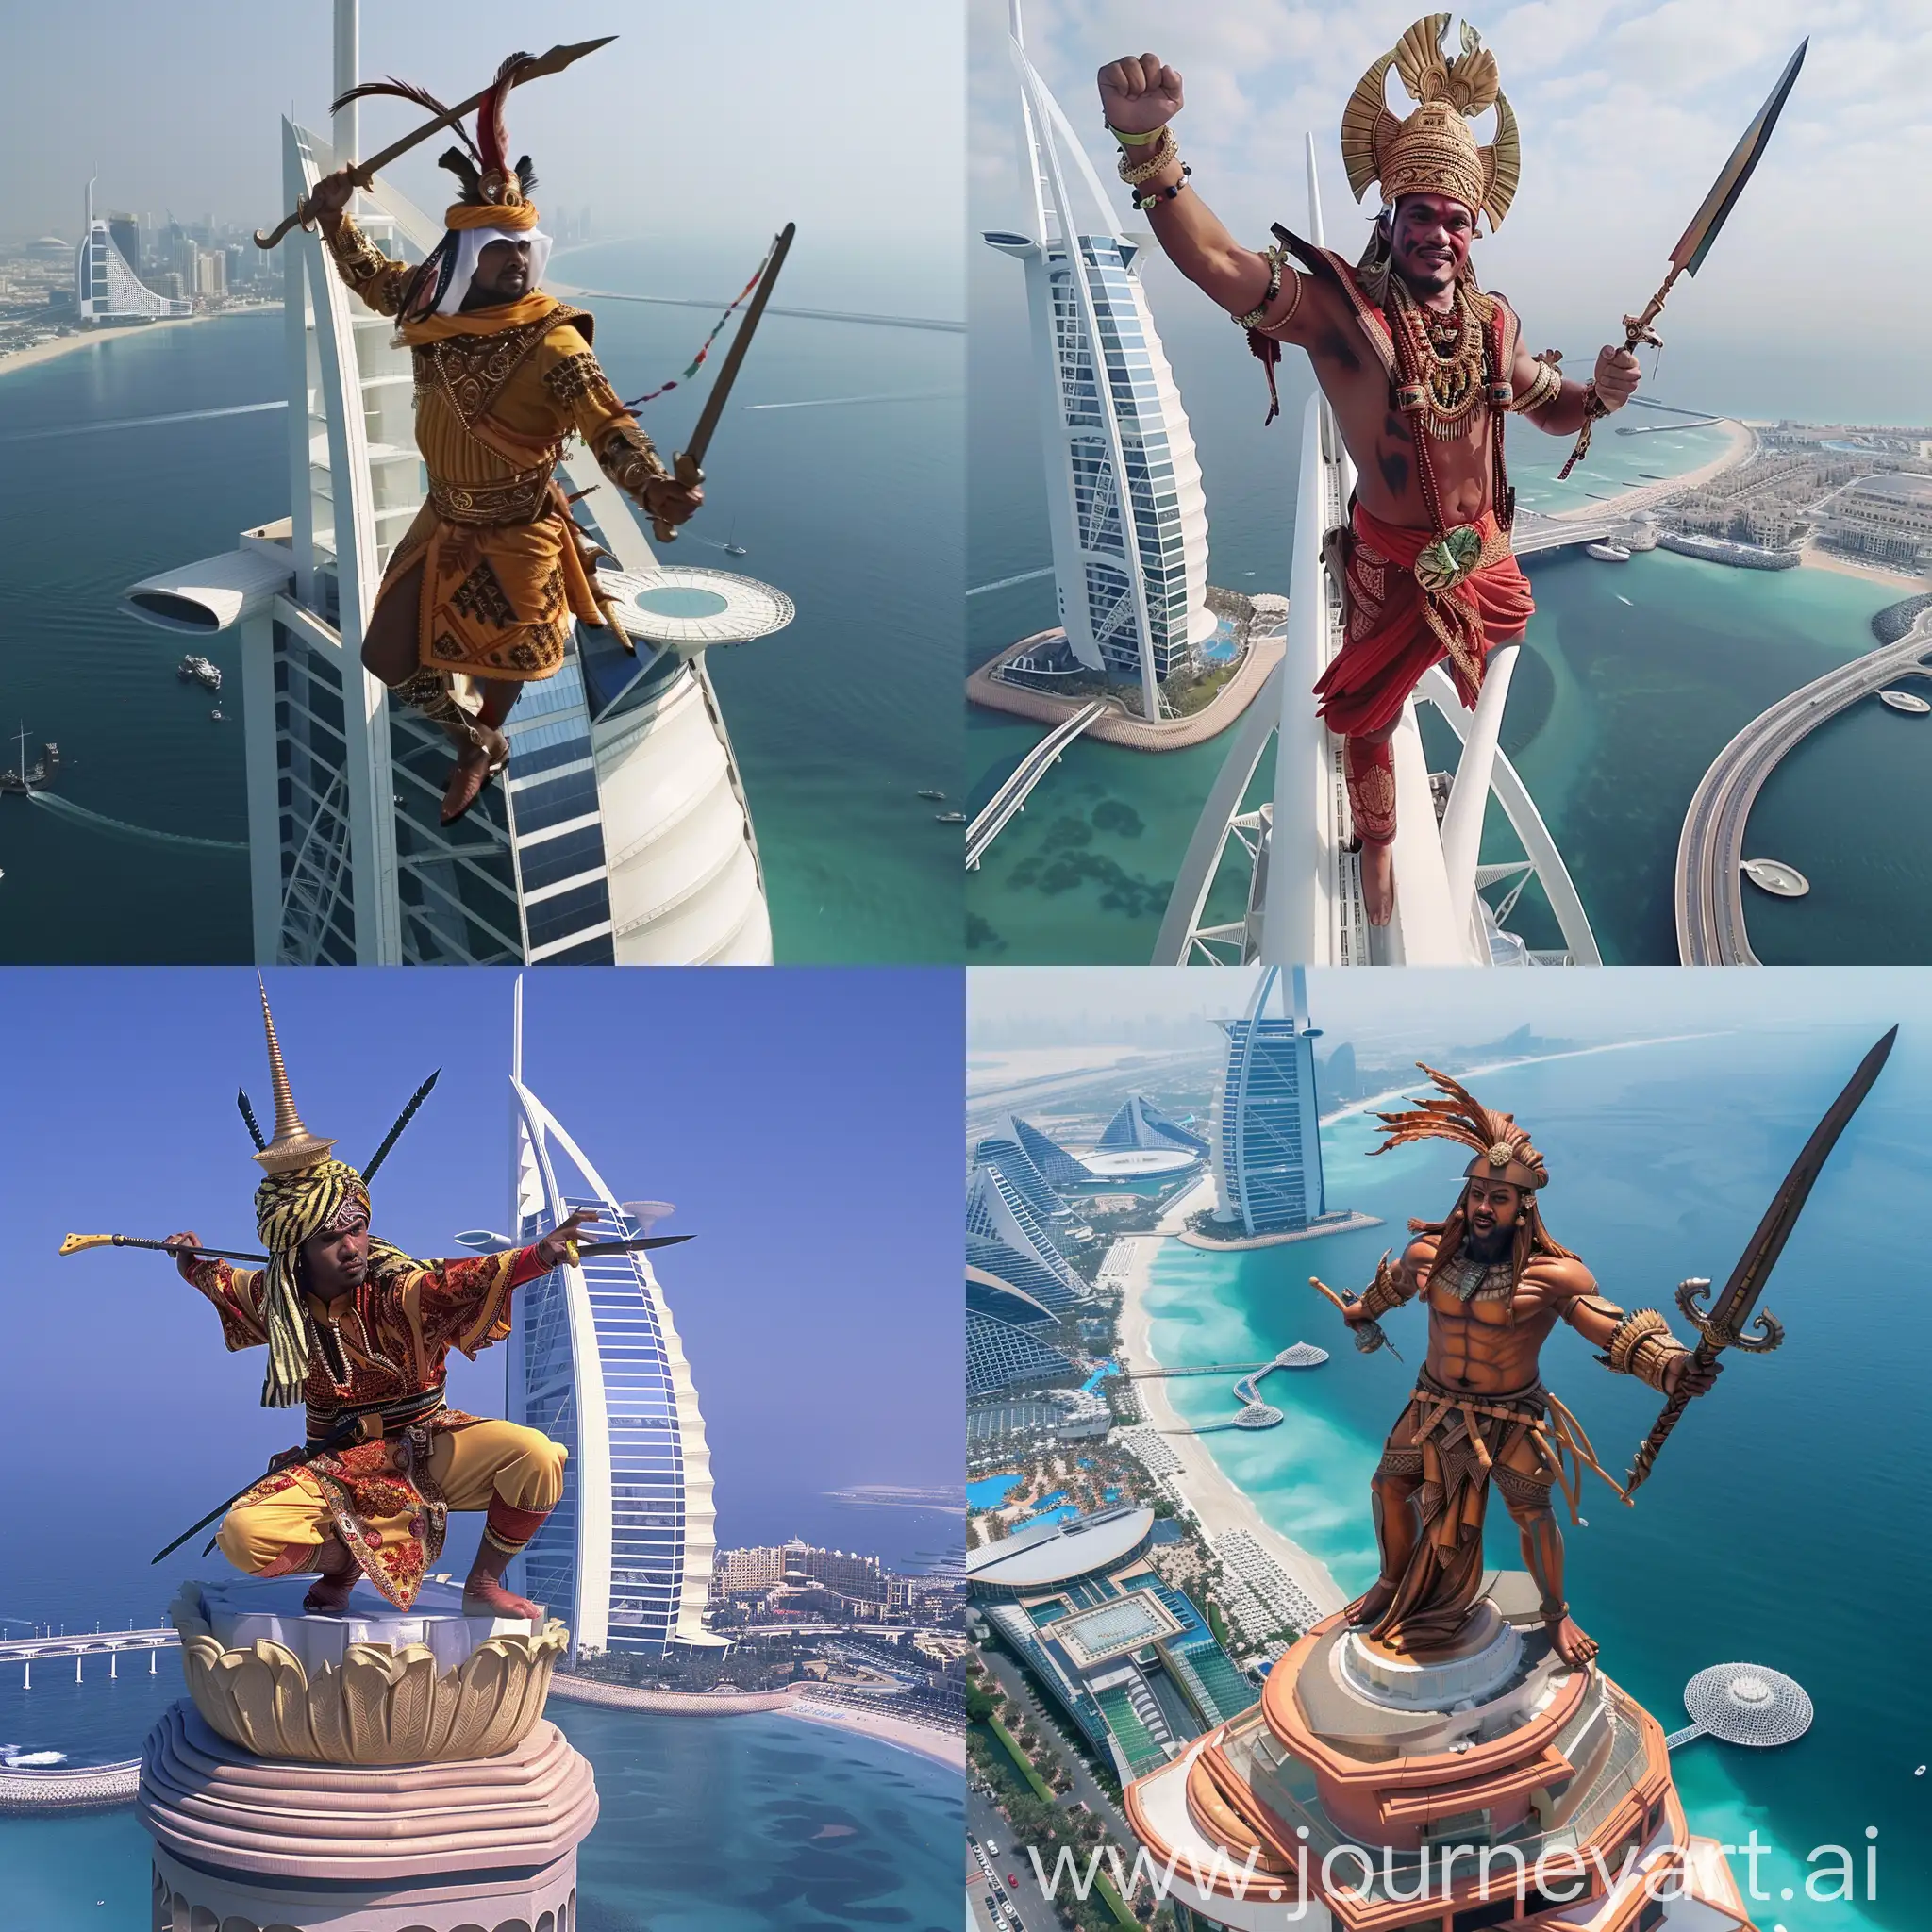 Malay warrior with a Tanjak and Keris on top of the Burj Al Arab